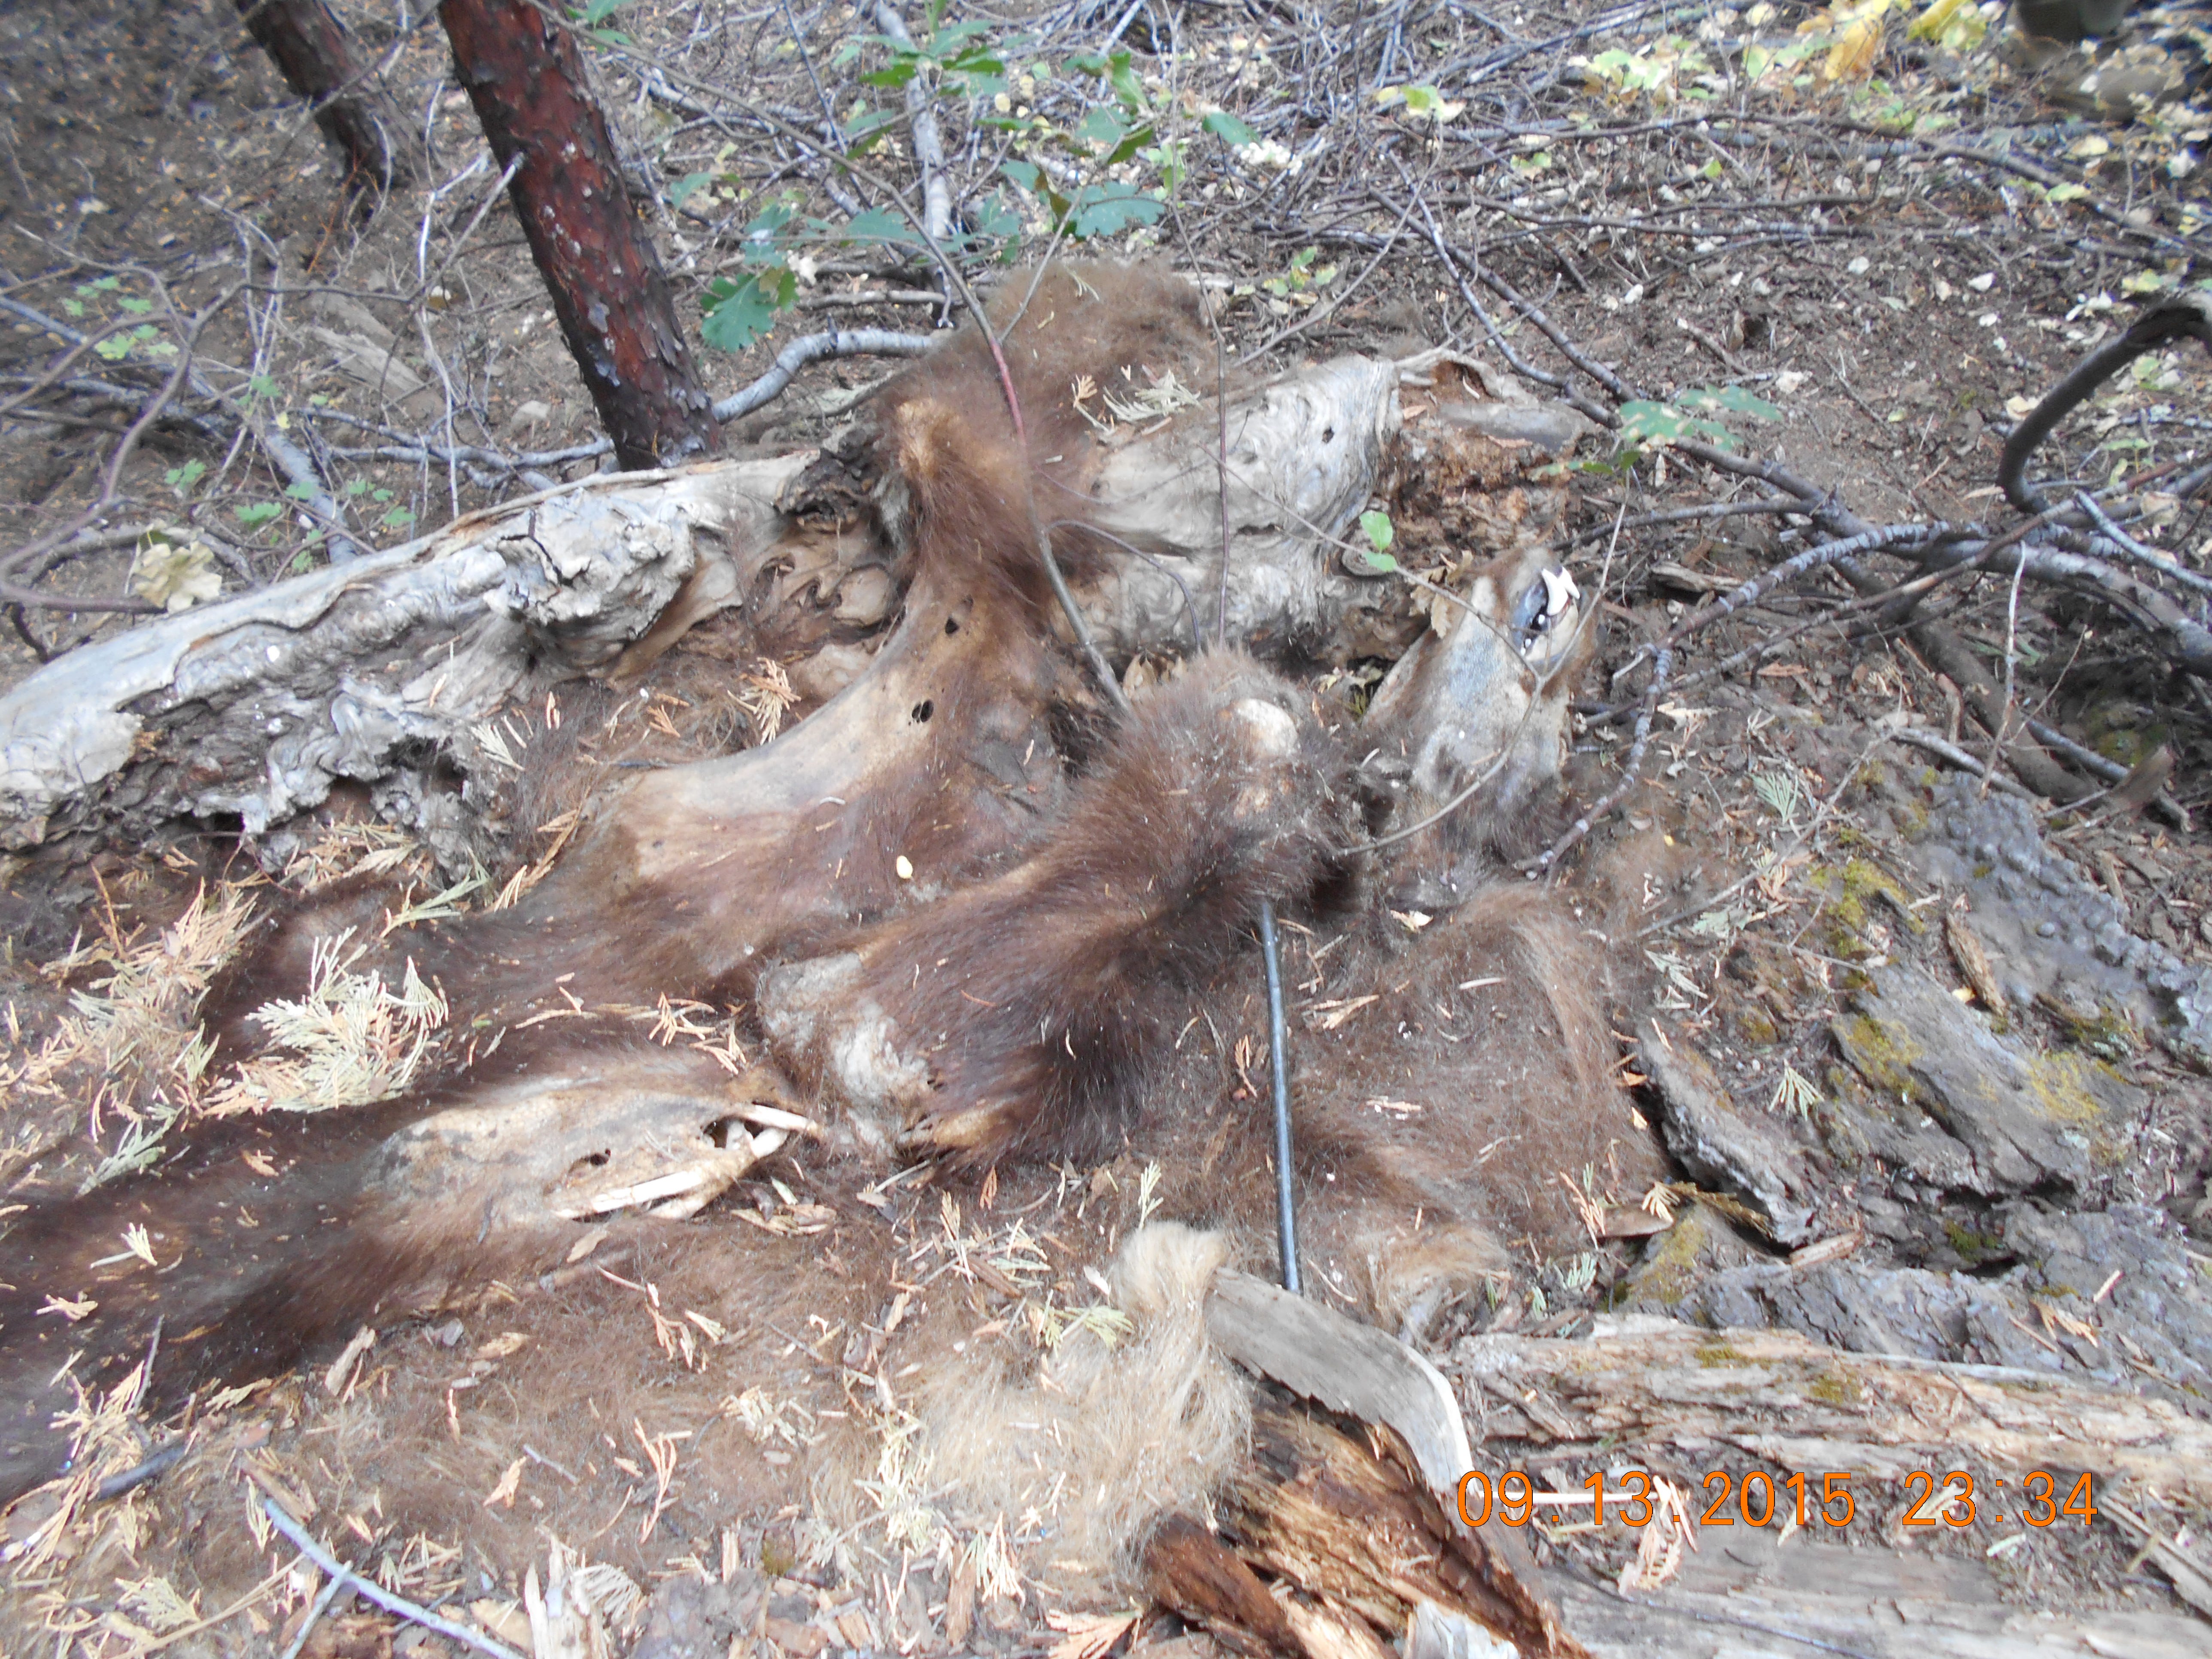 The remains of a dead black bear discovered on an illegal marijuana cultivation site.